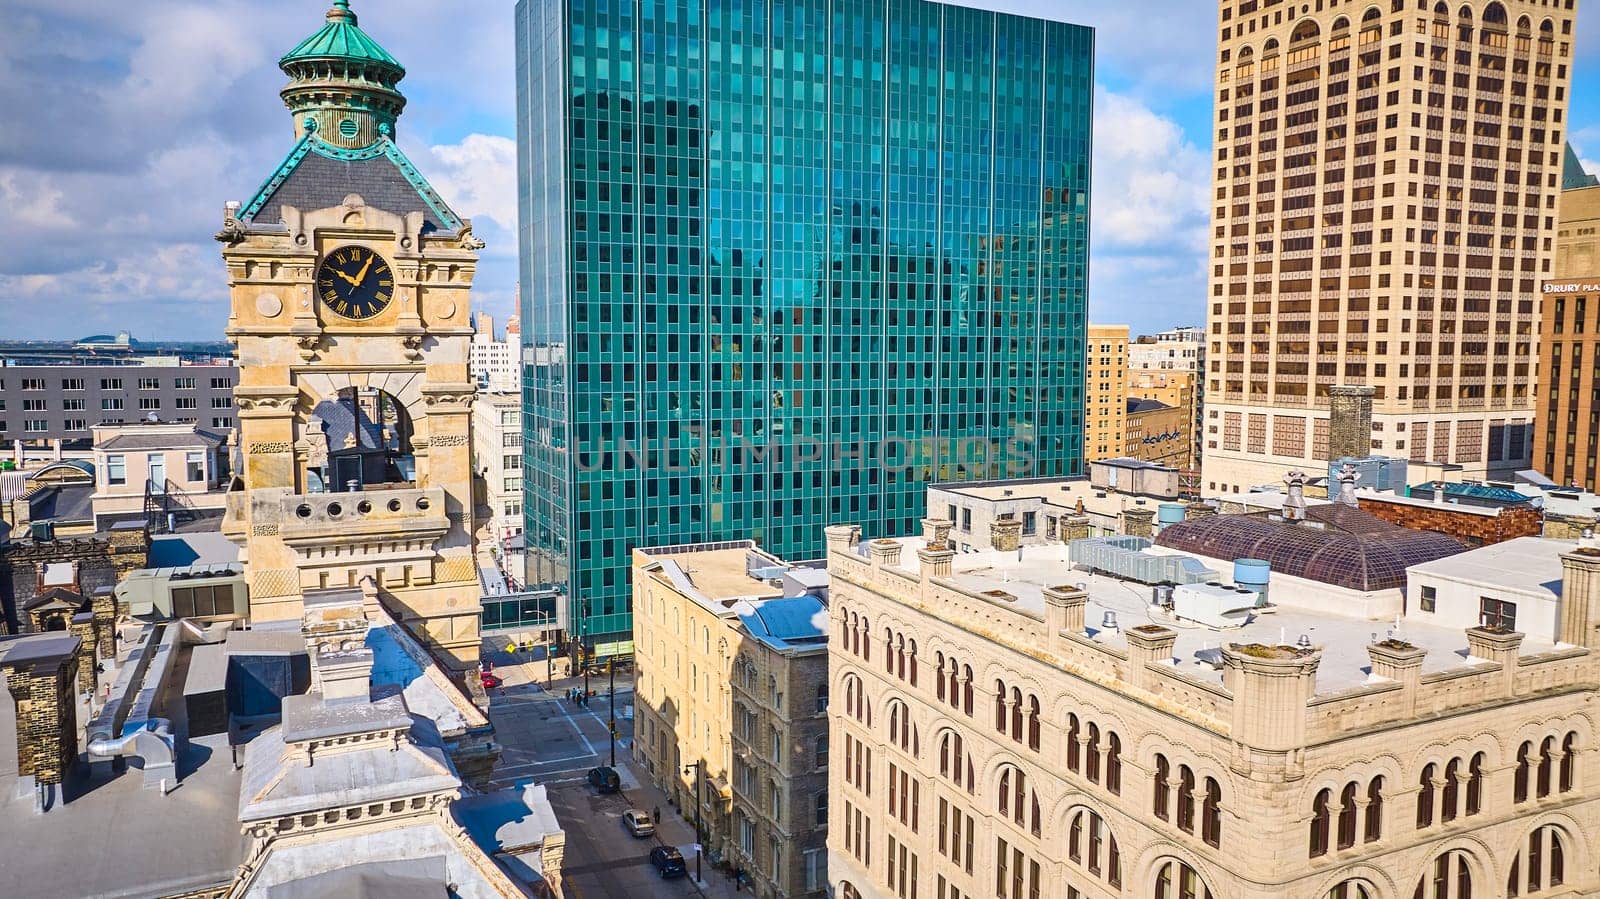 Aerial view of Milwaukee's historic clock tower contrasted against modern skyscraper, showcasing city's architectural diversity.